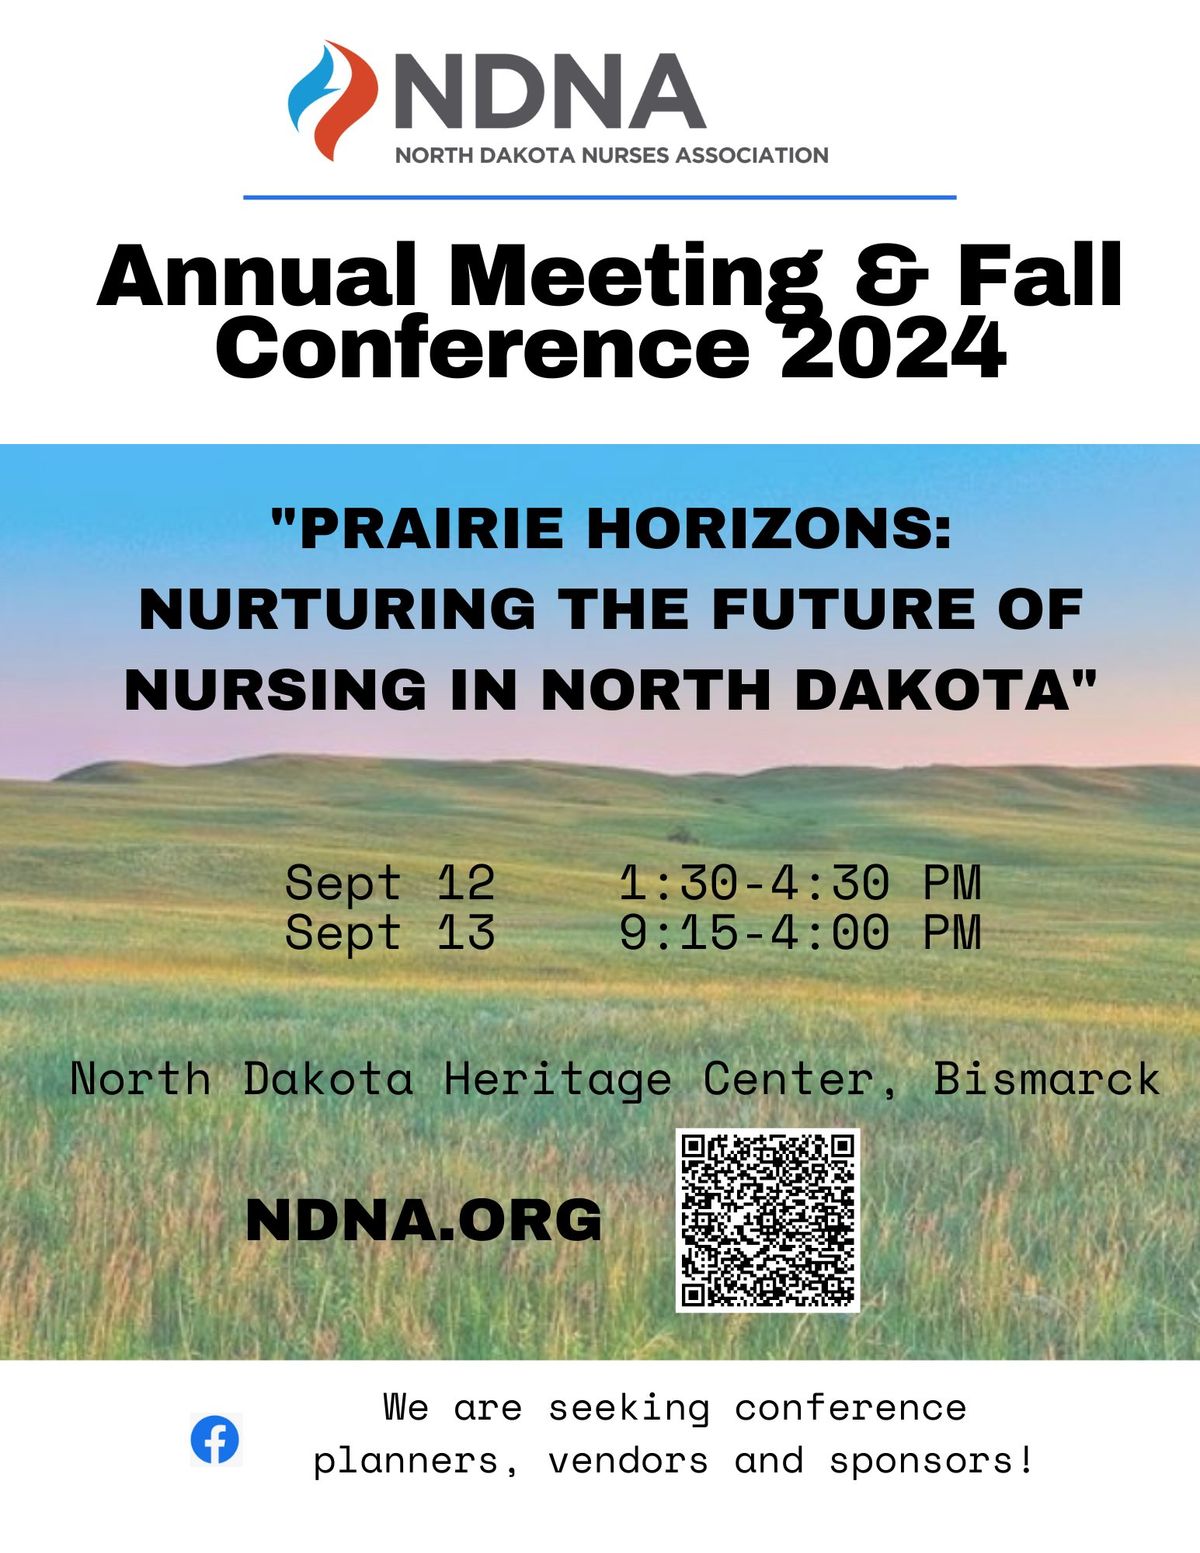 NDNA Annual Meeting and Fall Conference 2024 